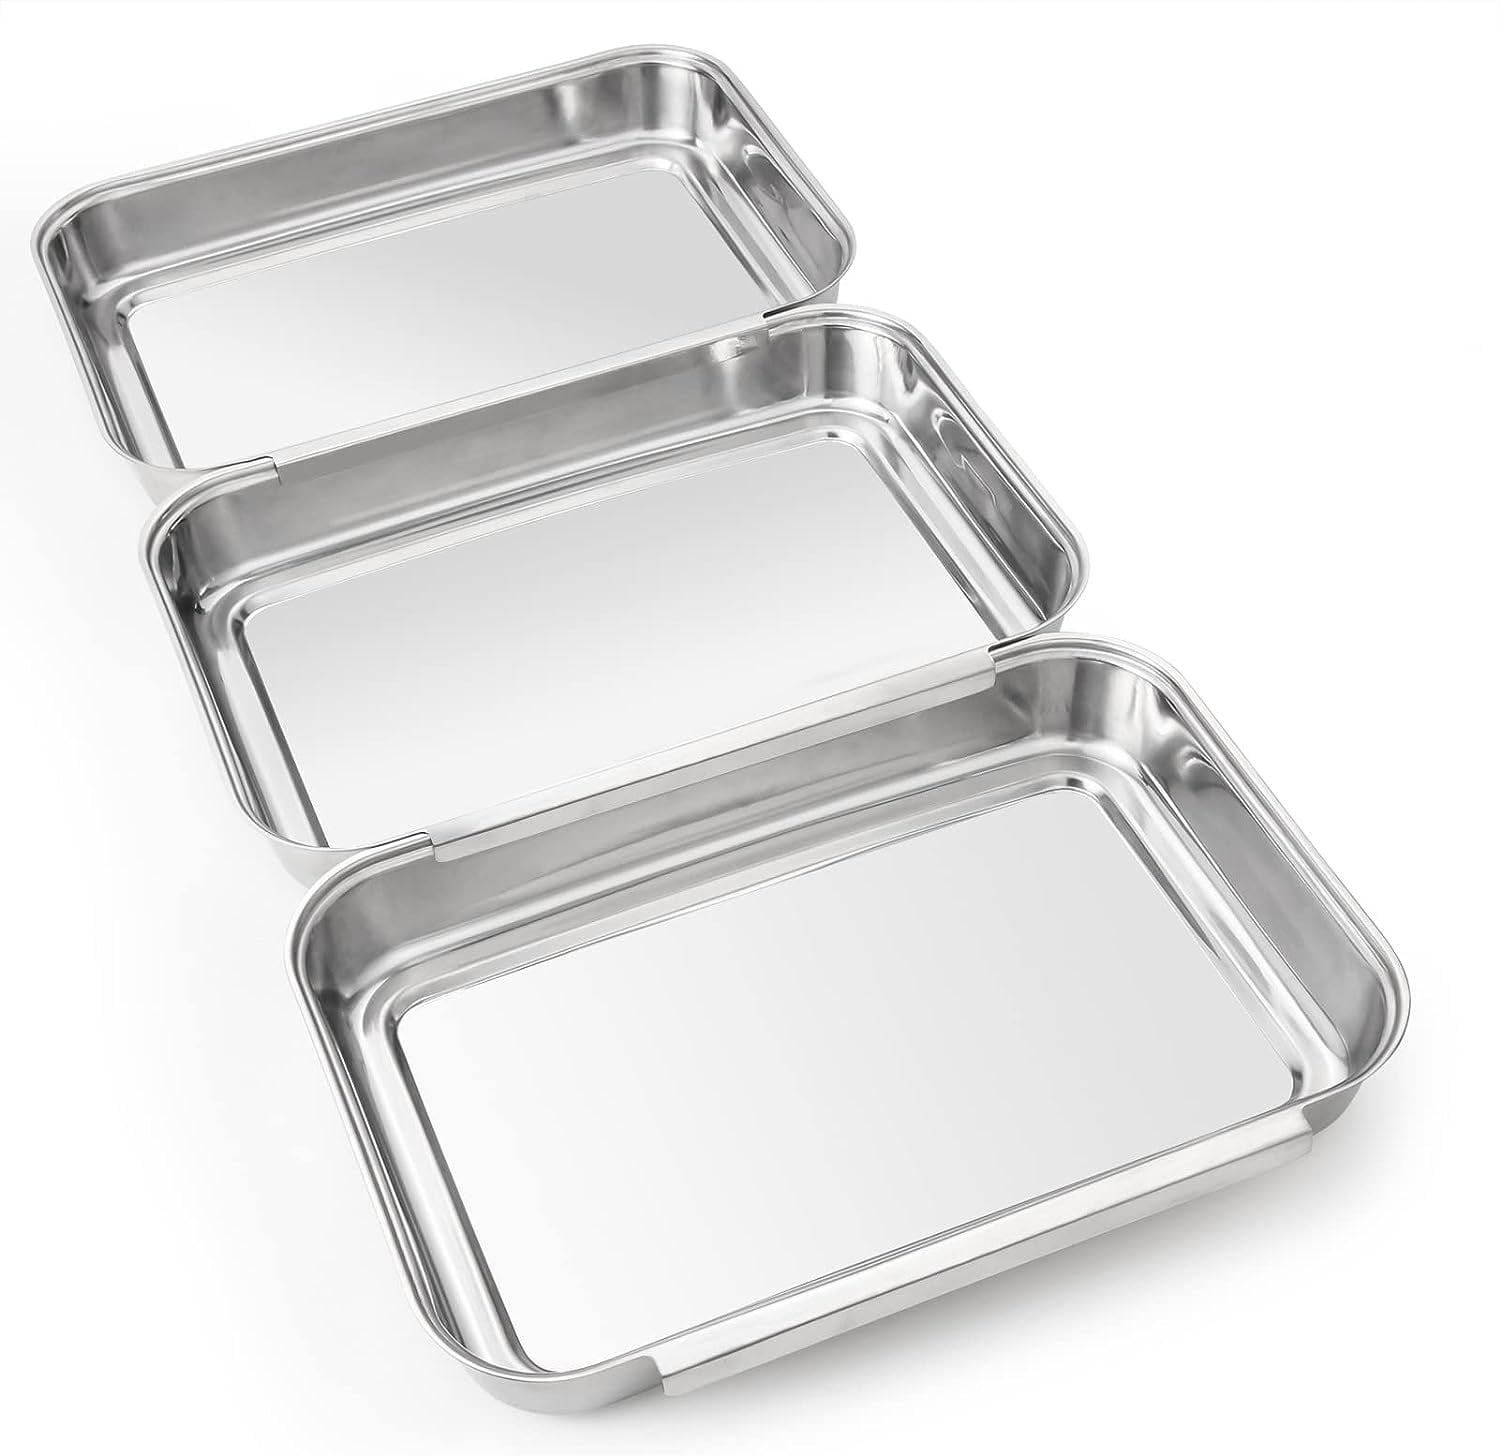 Mumufy Breading Trays Set of 3 Large Stainless Steel Breading Pans